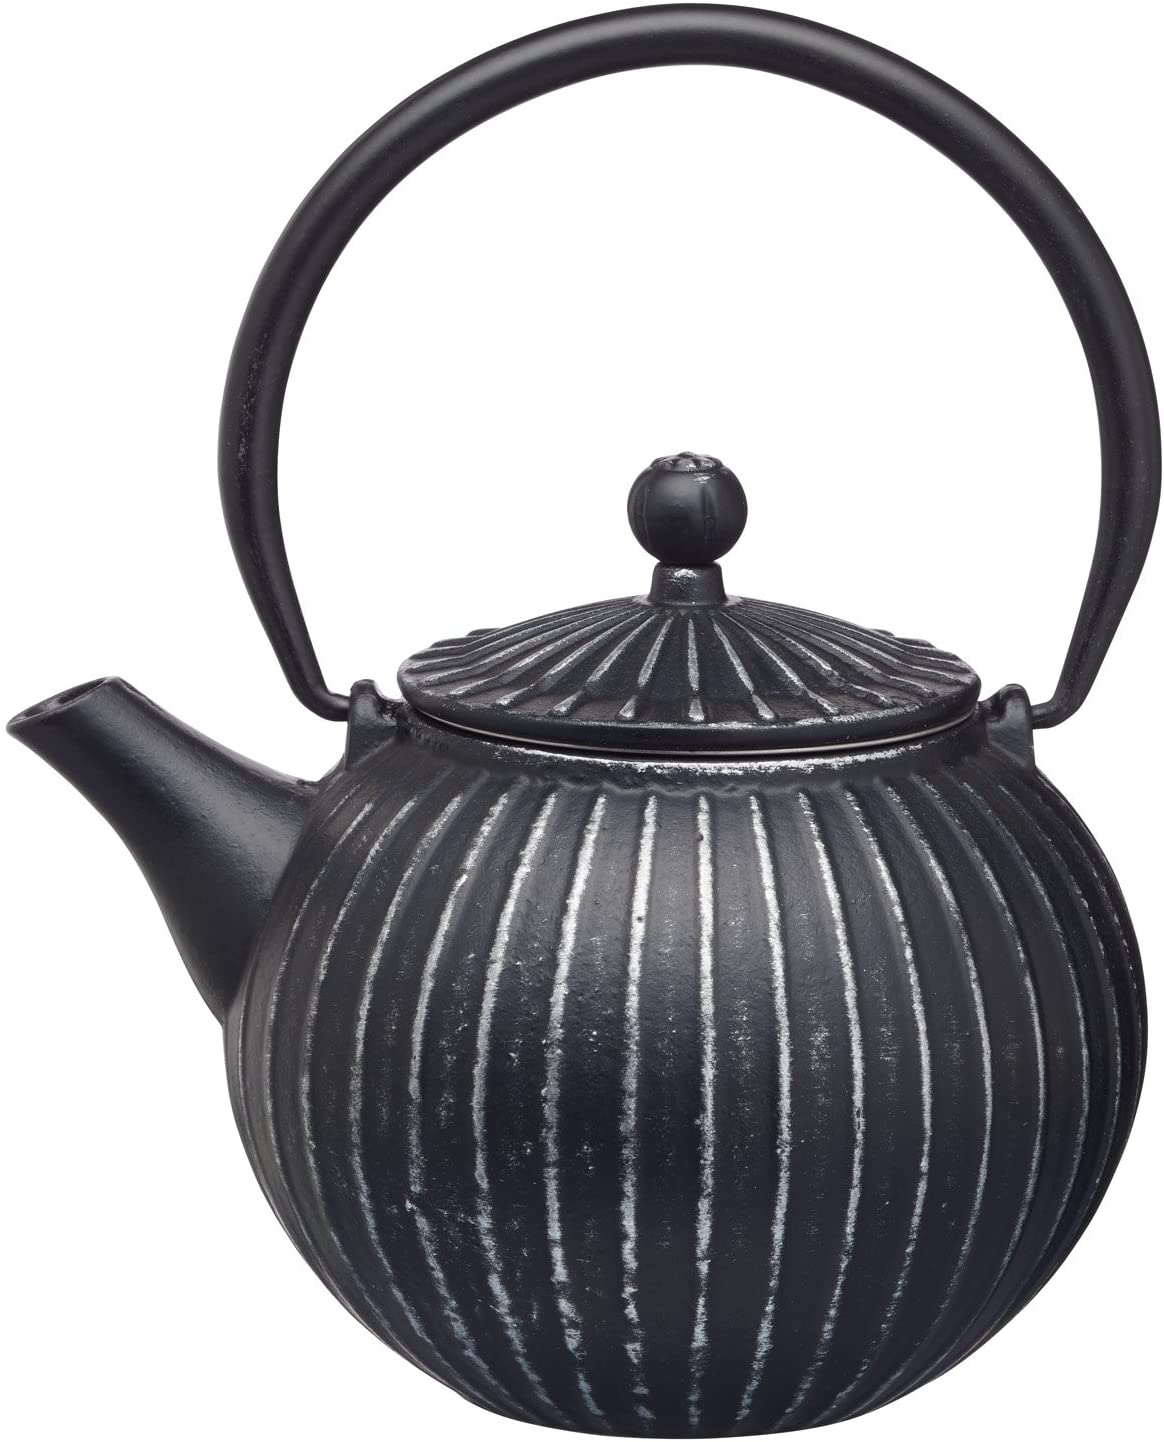 KitchenCraft Le\'Xpress Japanese Style Cast Iron 2 Cup Teapot with Infuser, Black 500 ml